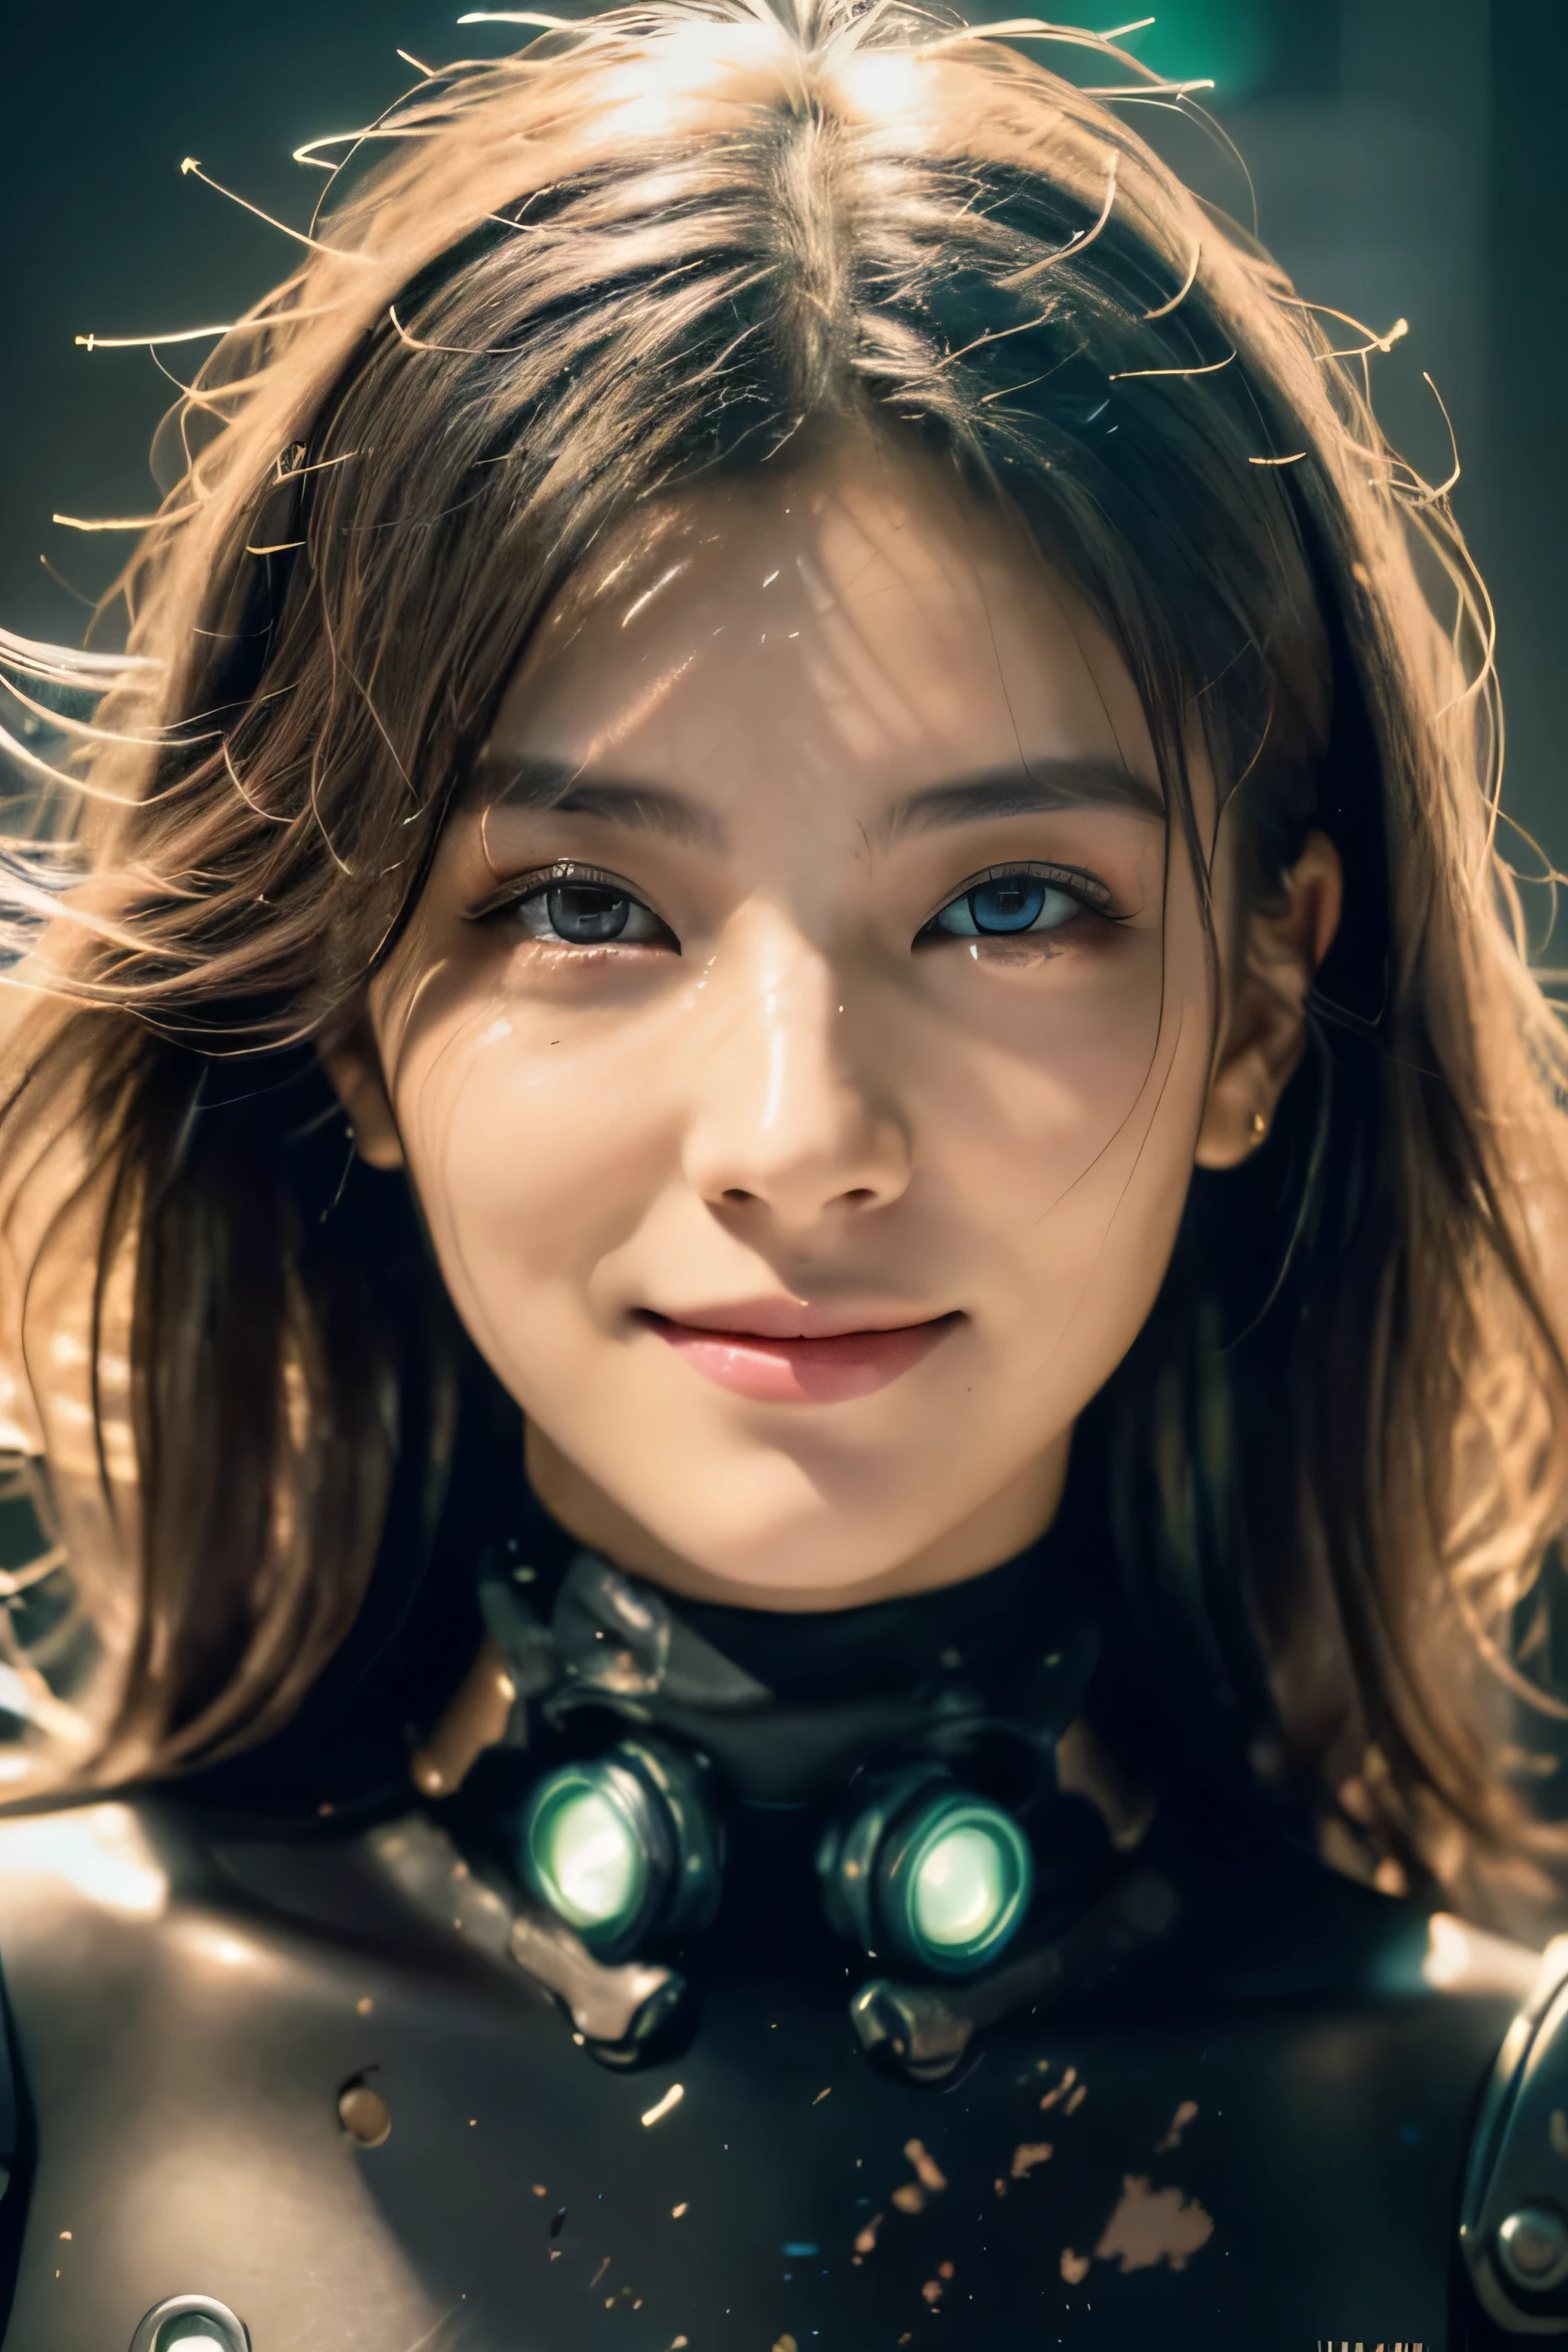 (Best Quality, Masterpiece, Ultra High Definition, High resolution, highly detailed, High Definition Face, clear pictures, HDR:1.5), (20-year-old woman:1.3), (eyes be visually in focus:1.4), (film photography style:1.5), (cyberpunk beauty, background neon sign:1.5), Popular Korean style makeup, (Glossy, highly fine breasts, shiny skin), highly detailed facial and skin texture, (beautiful eyes, light in the eyes, detailed eyes), Very smile, white skin, very Fair skin, violently fluttering hair, 